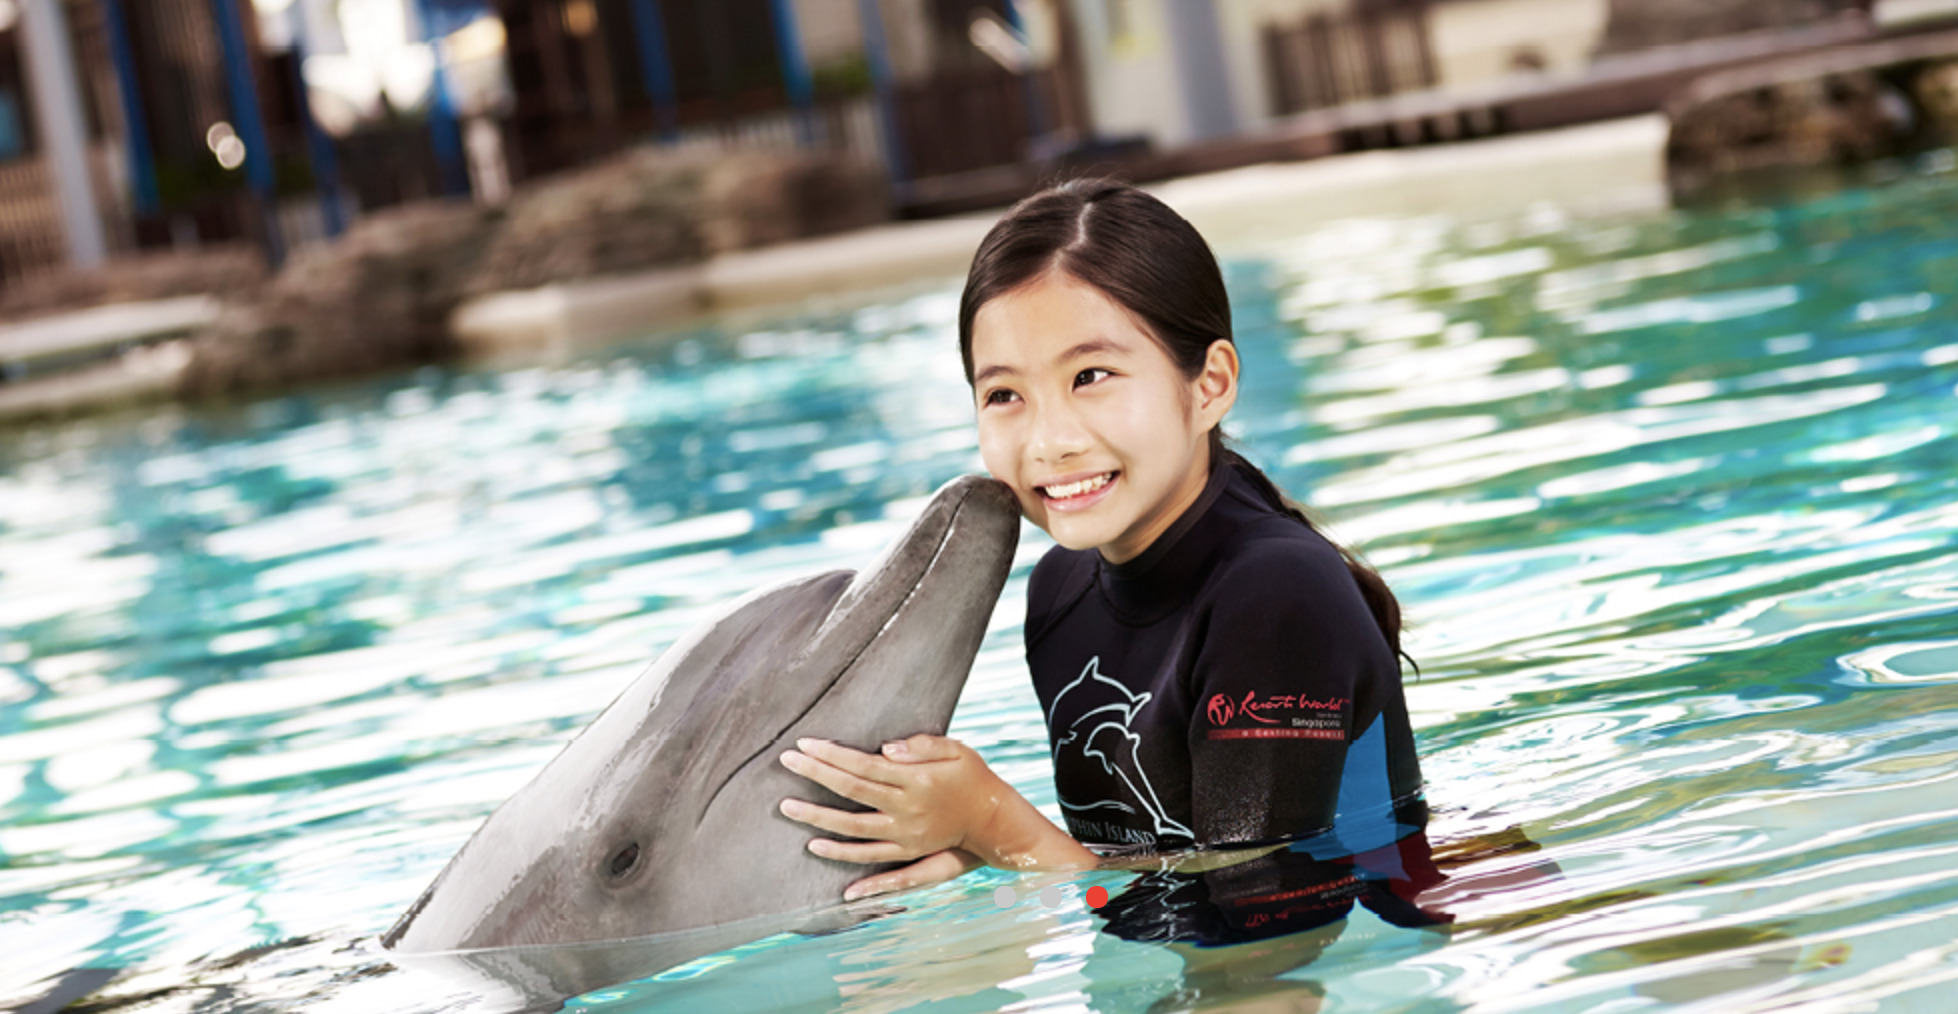 Dolphins forced to perform, take photos and be touched by visitors to Dolphin Island at Resorts World Sentosa in Singapore. Photo: Resorts World Sentosa